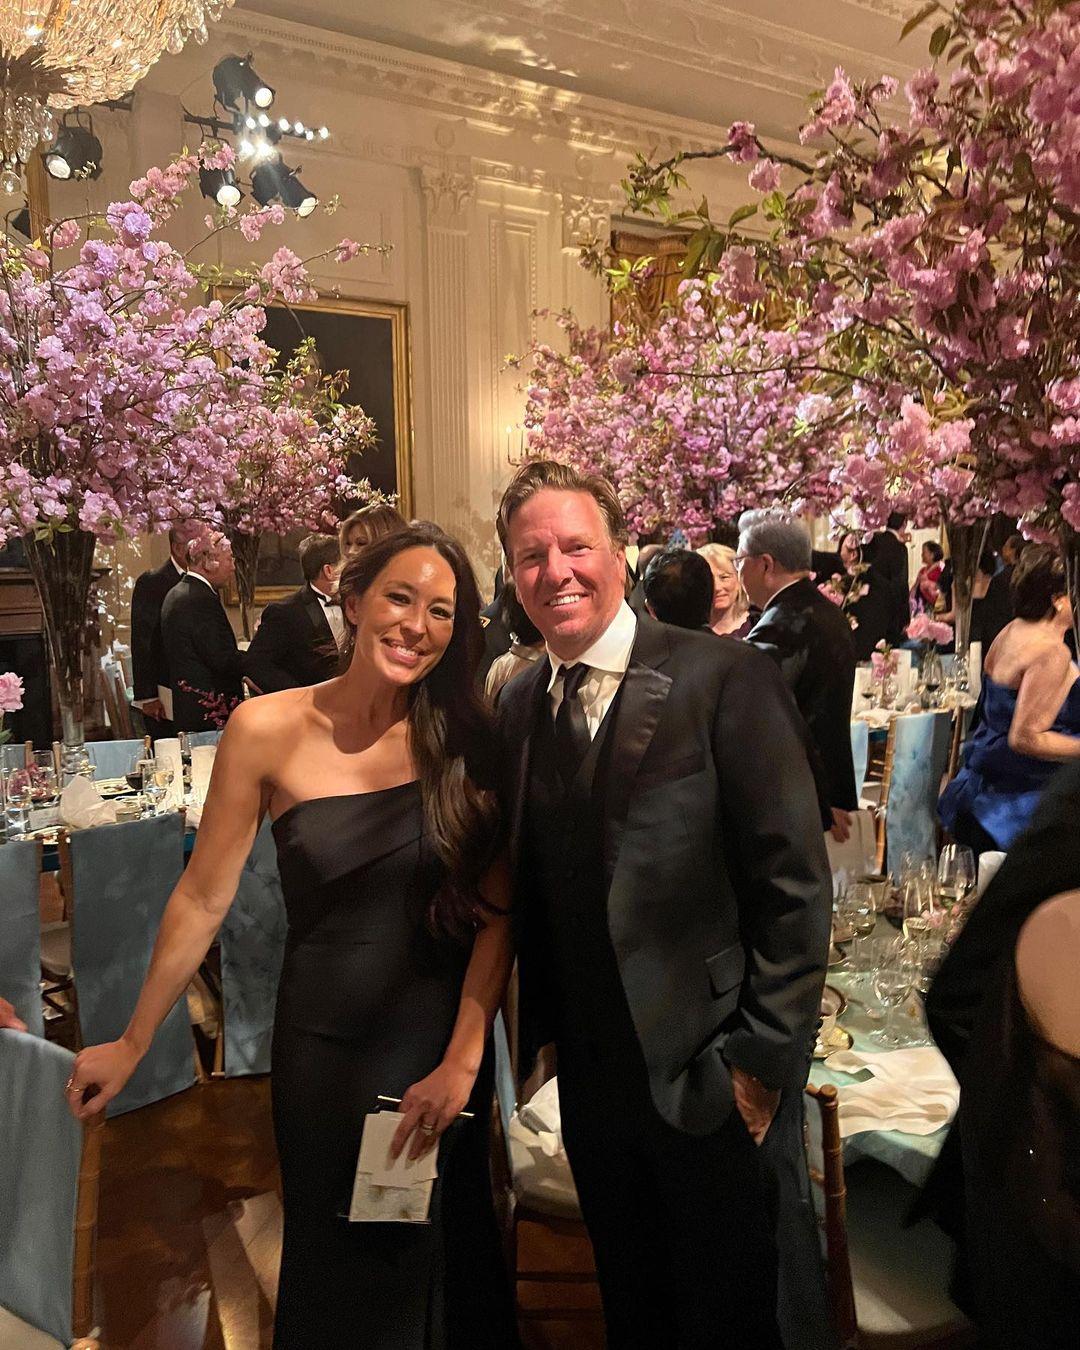 Joanna & Chip Gaines Stun At White House State Dinner After Trip To Seoul